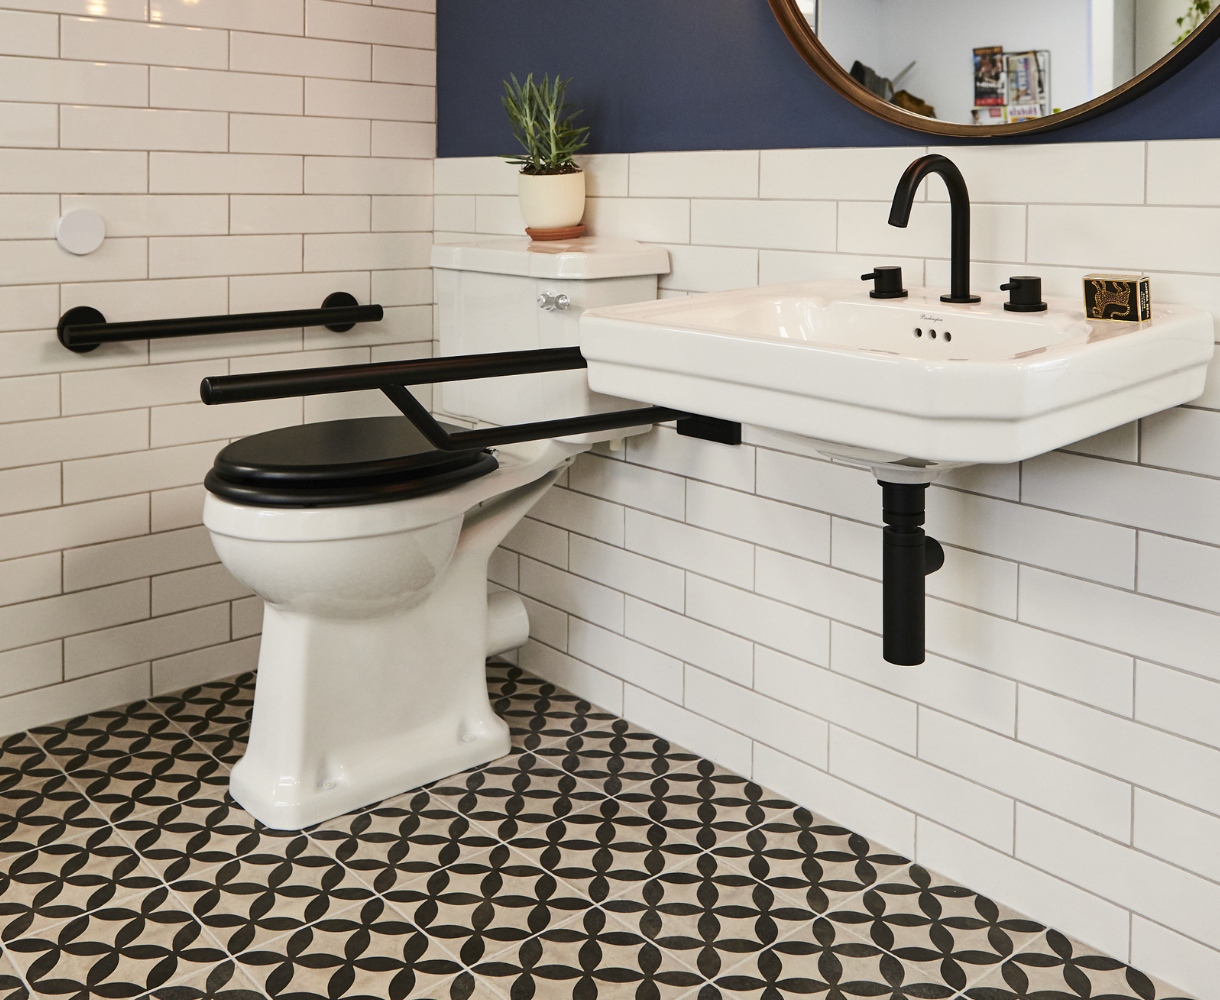 Comfort height toilet and basin in a traditional style with matt black grab rails and taps. Monochrome pattern tiled floor and white metro tiles